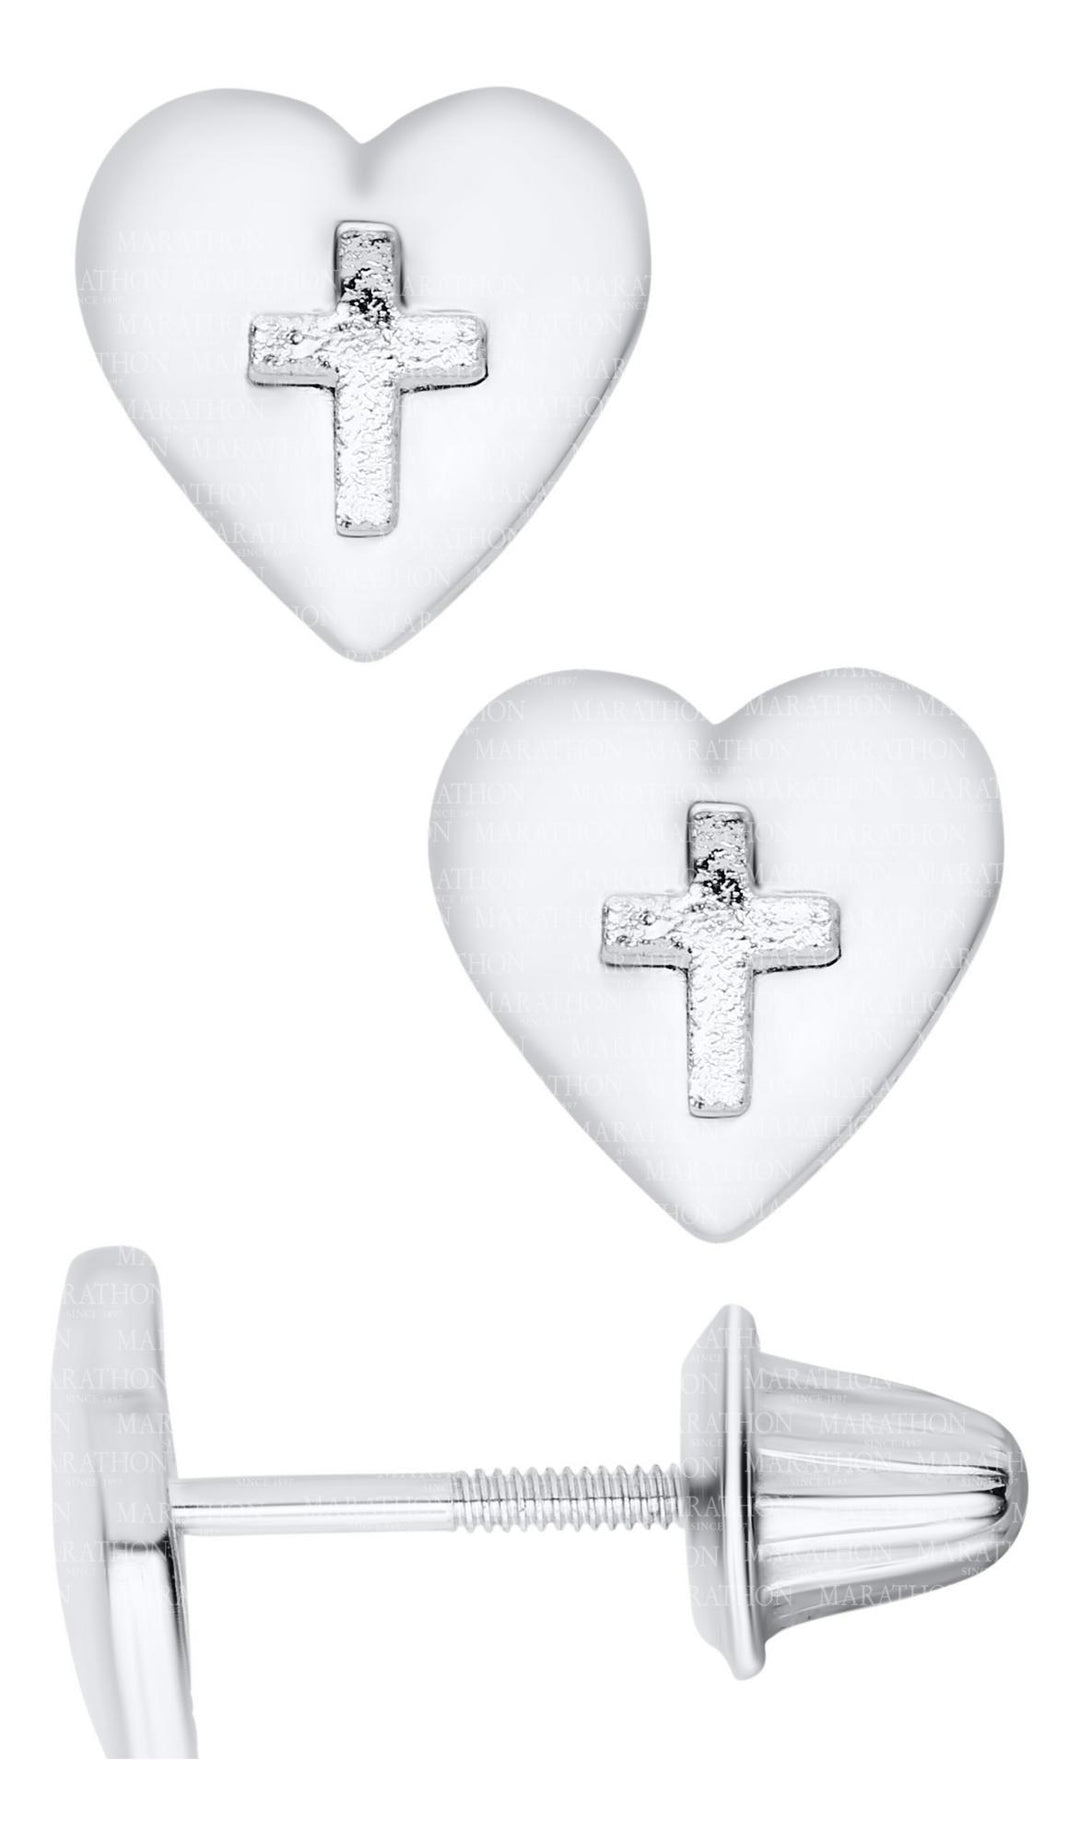 Childs Heart Earrings with Cross Engraving